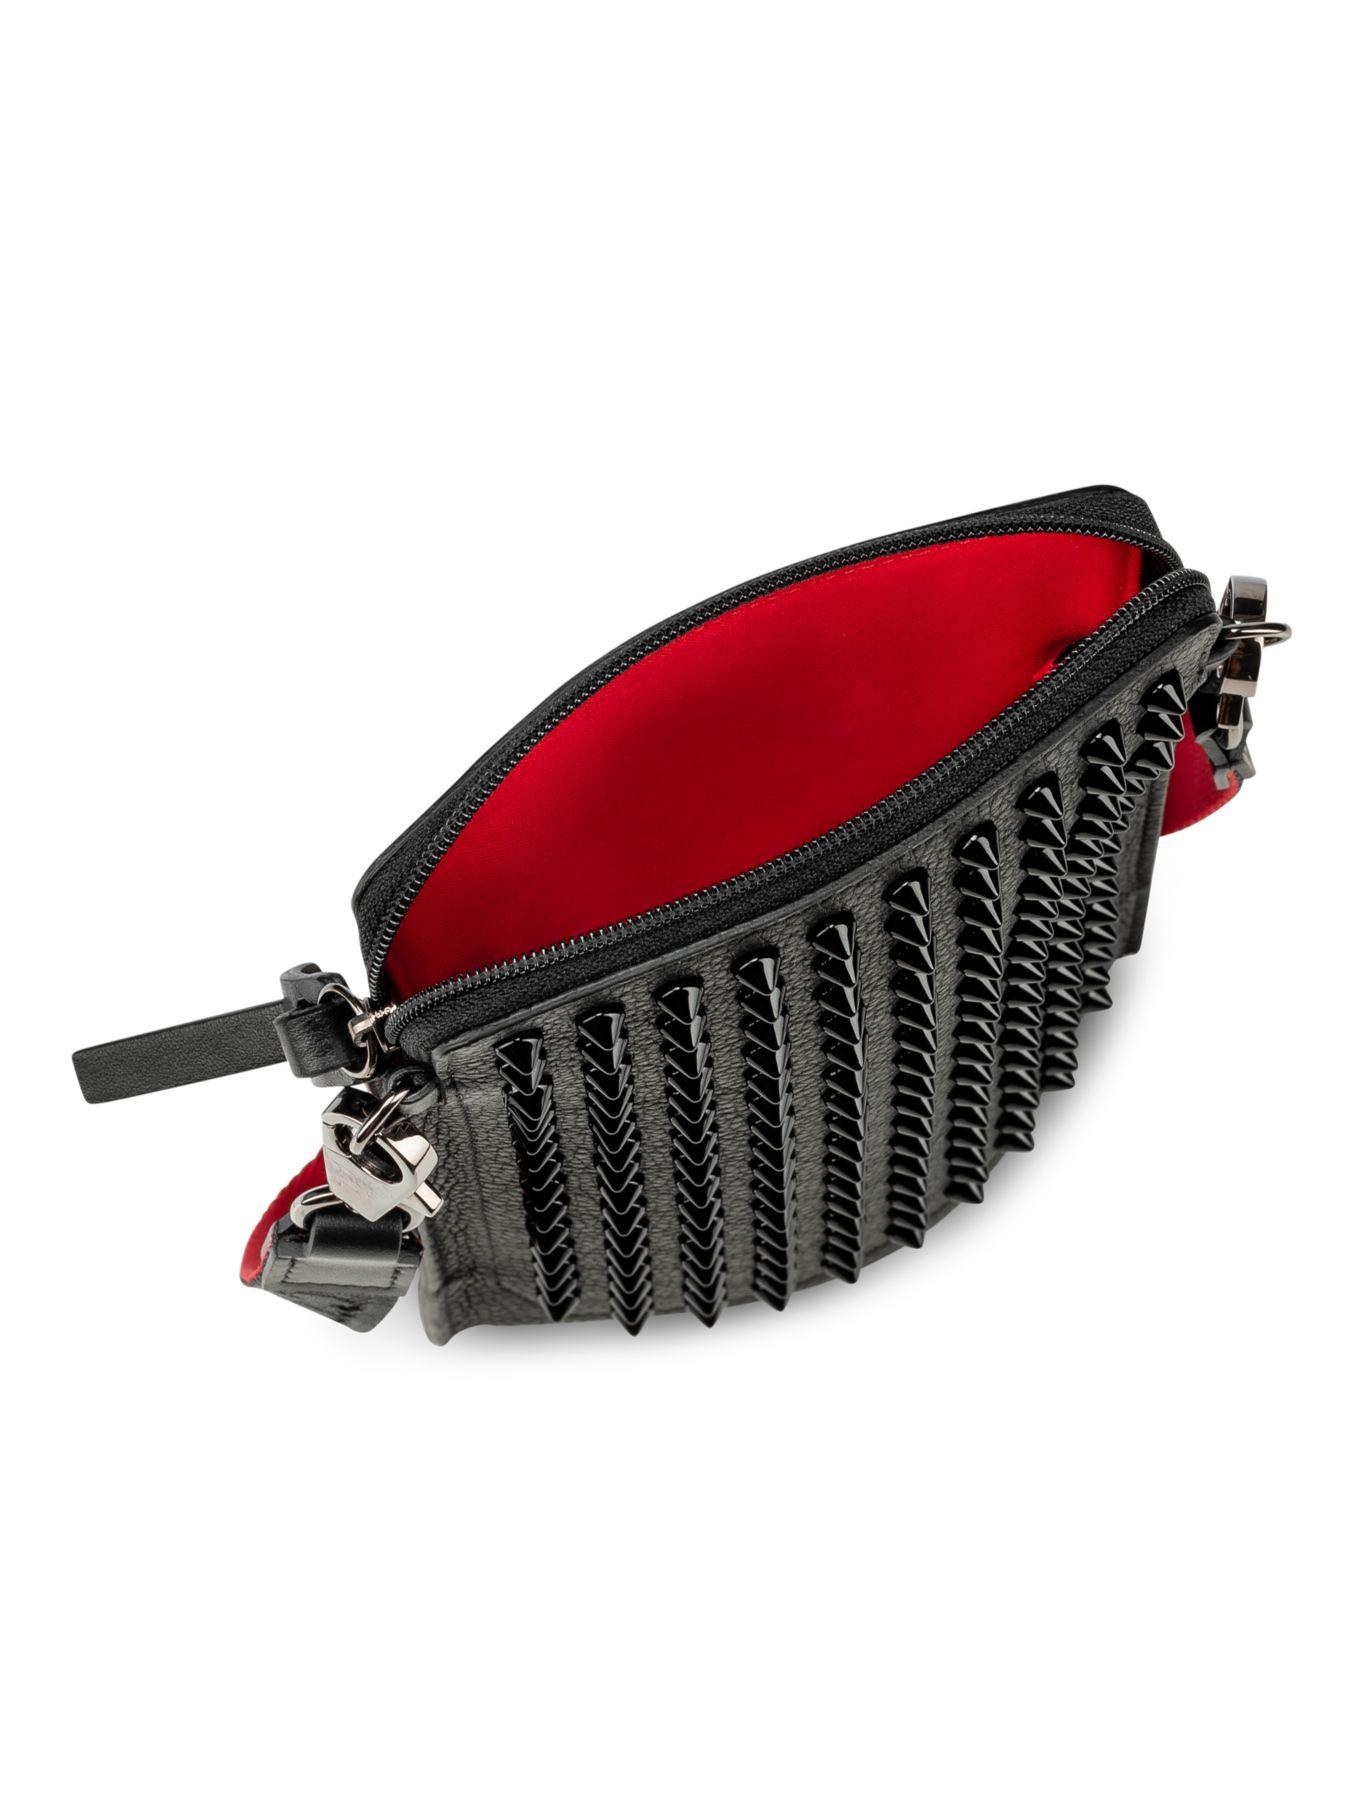 Christian Louboutin Loubilab Spiked Leather Case in Black for Men - Lyst